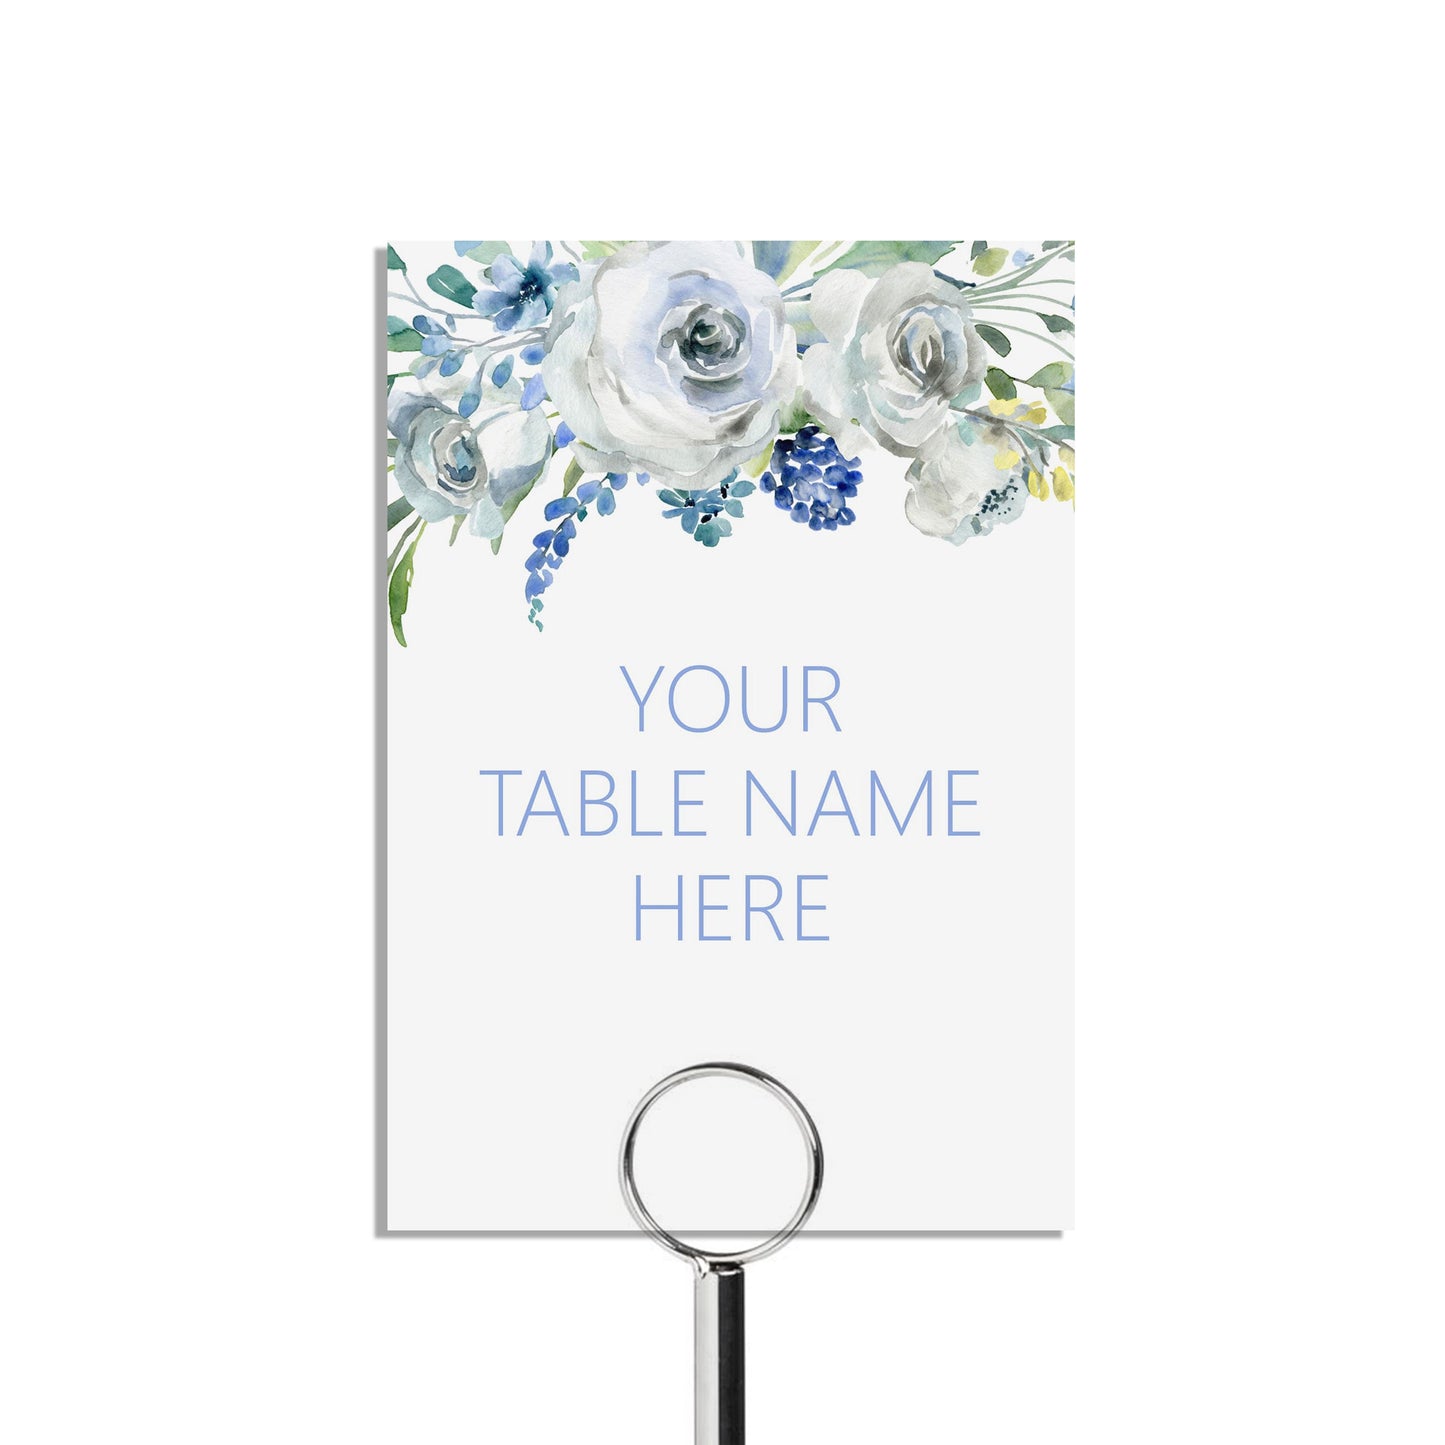 Custom Table Name Cards - Blue Floral